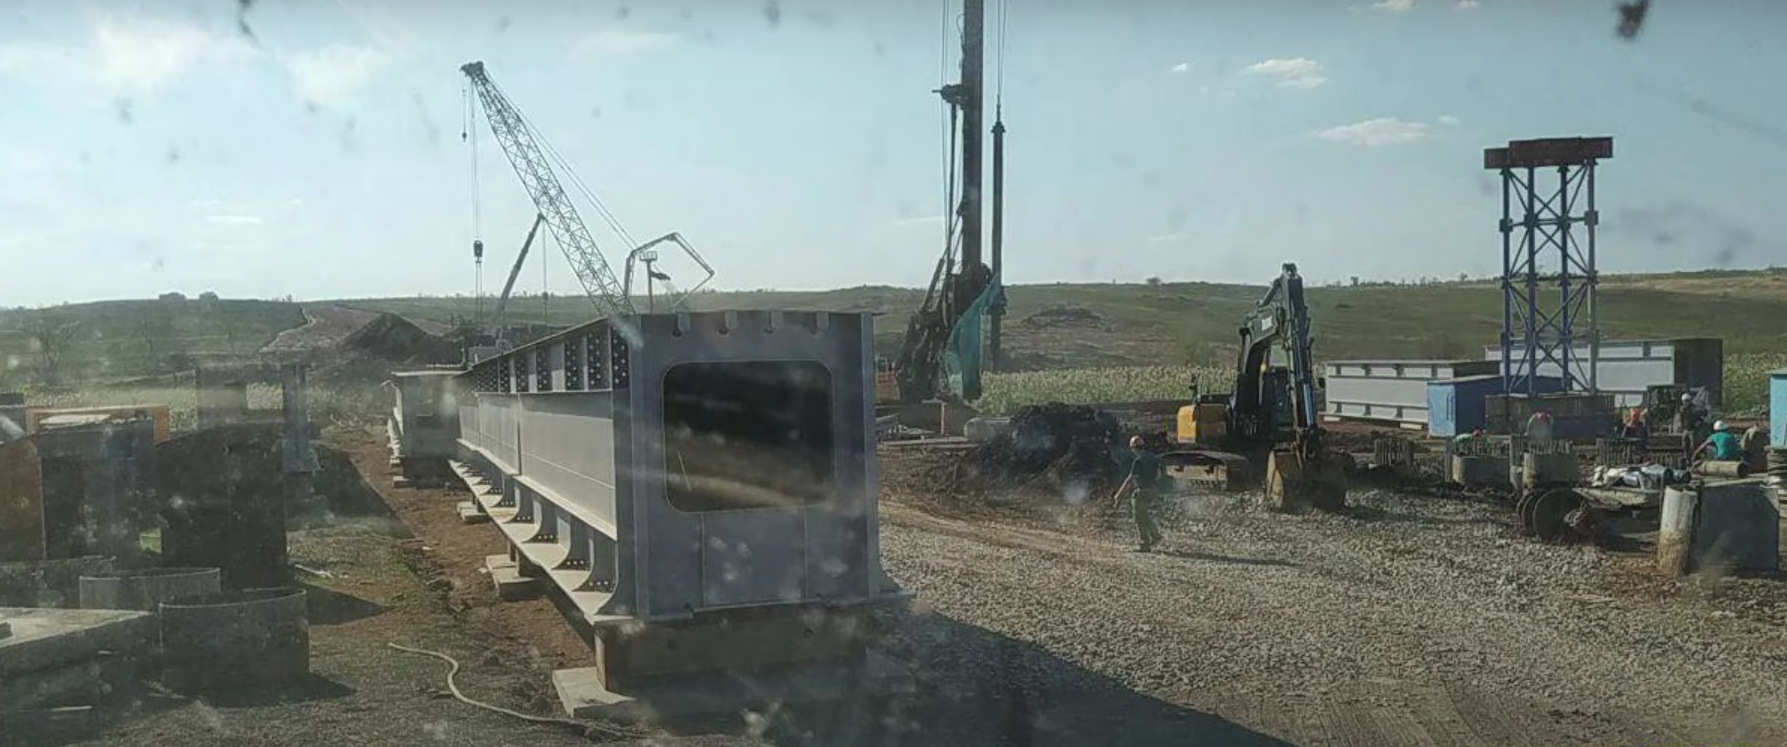 Russians are building another railway connection 30 km away from the front.